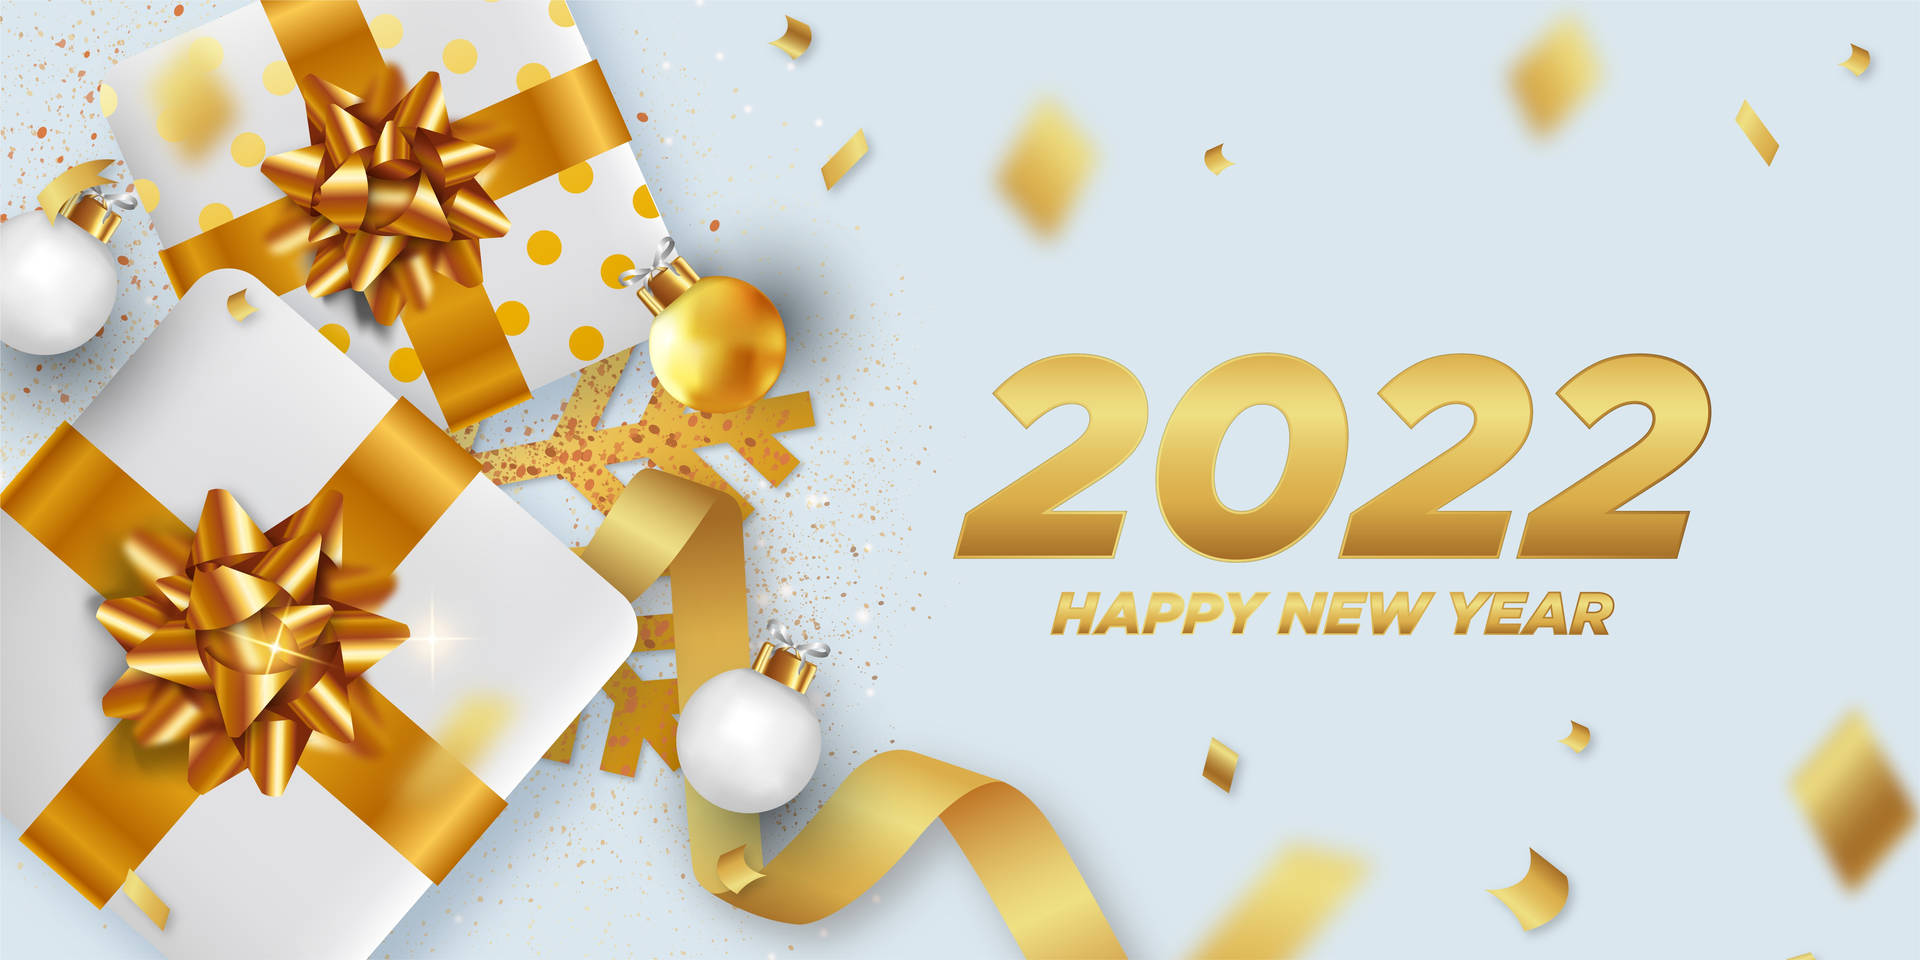 Happy New Year 2022 Gold Gifts Wallpaper